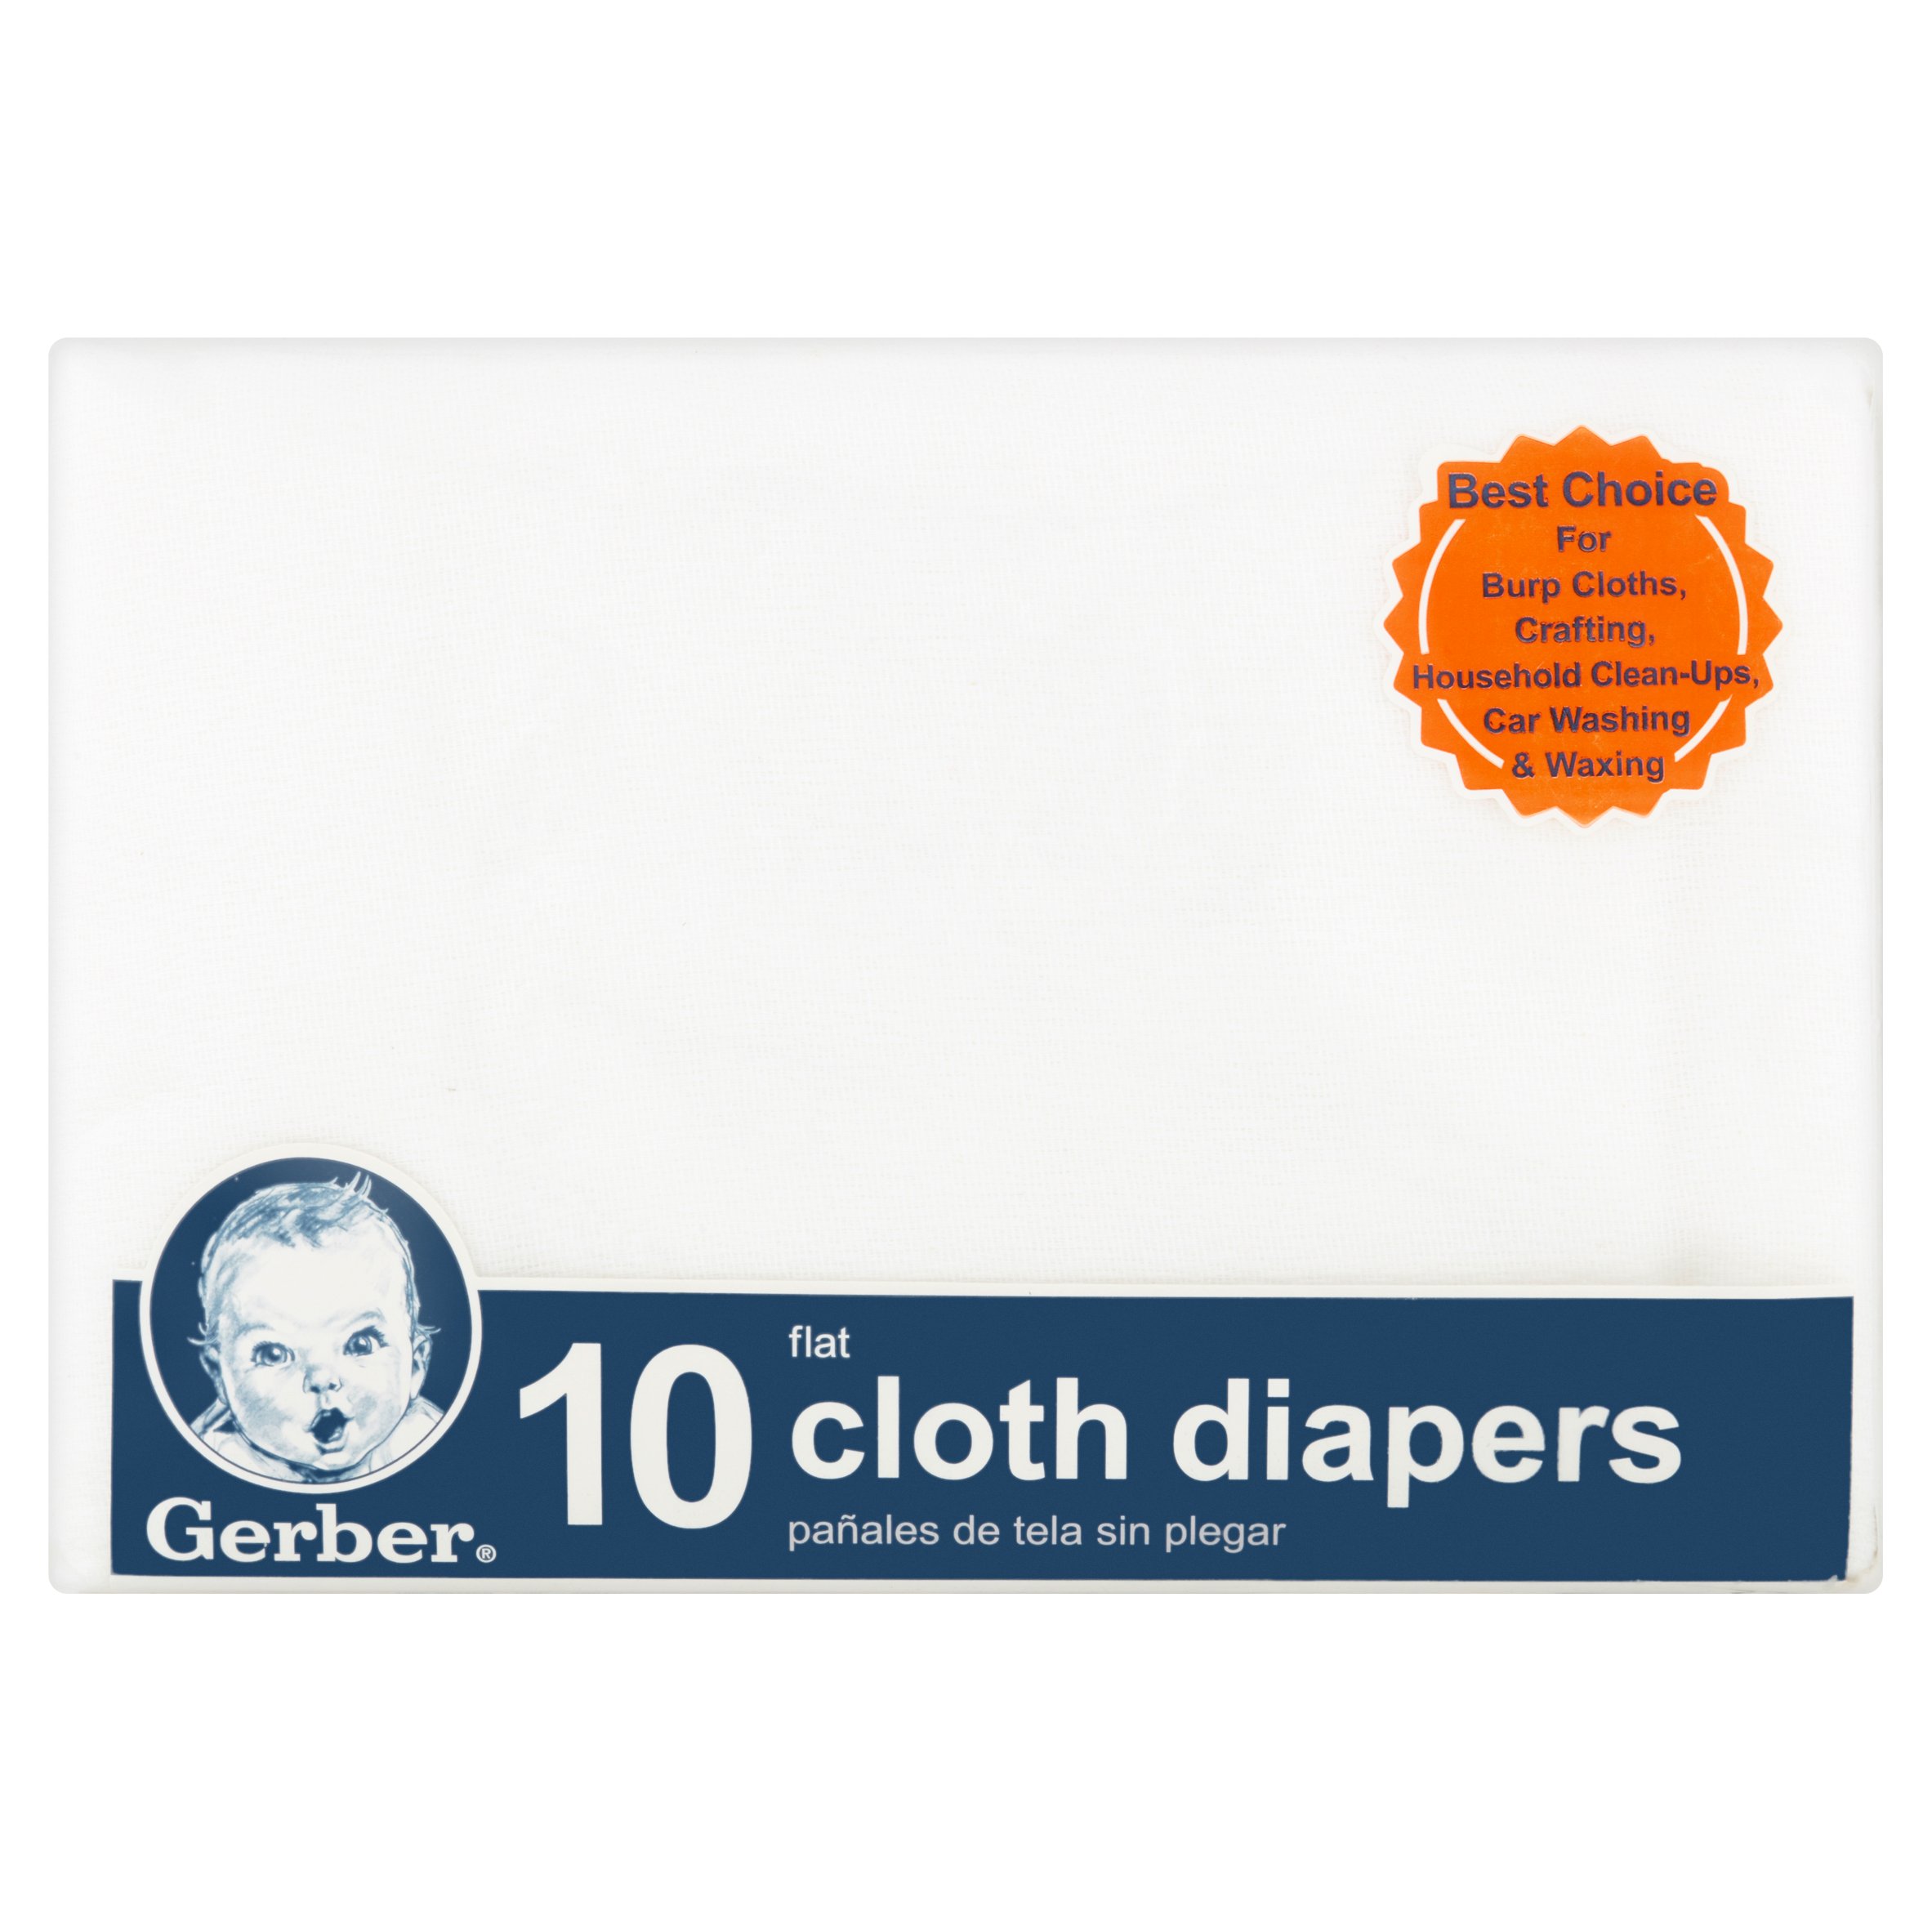 Gerber 100% Cotton Flatfold Cloth Baby Diaper, White 10 Pack - image 3 of 8